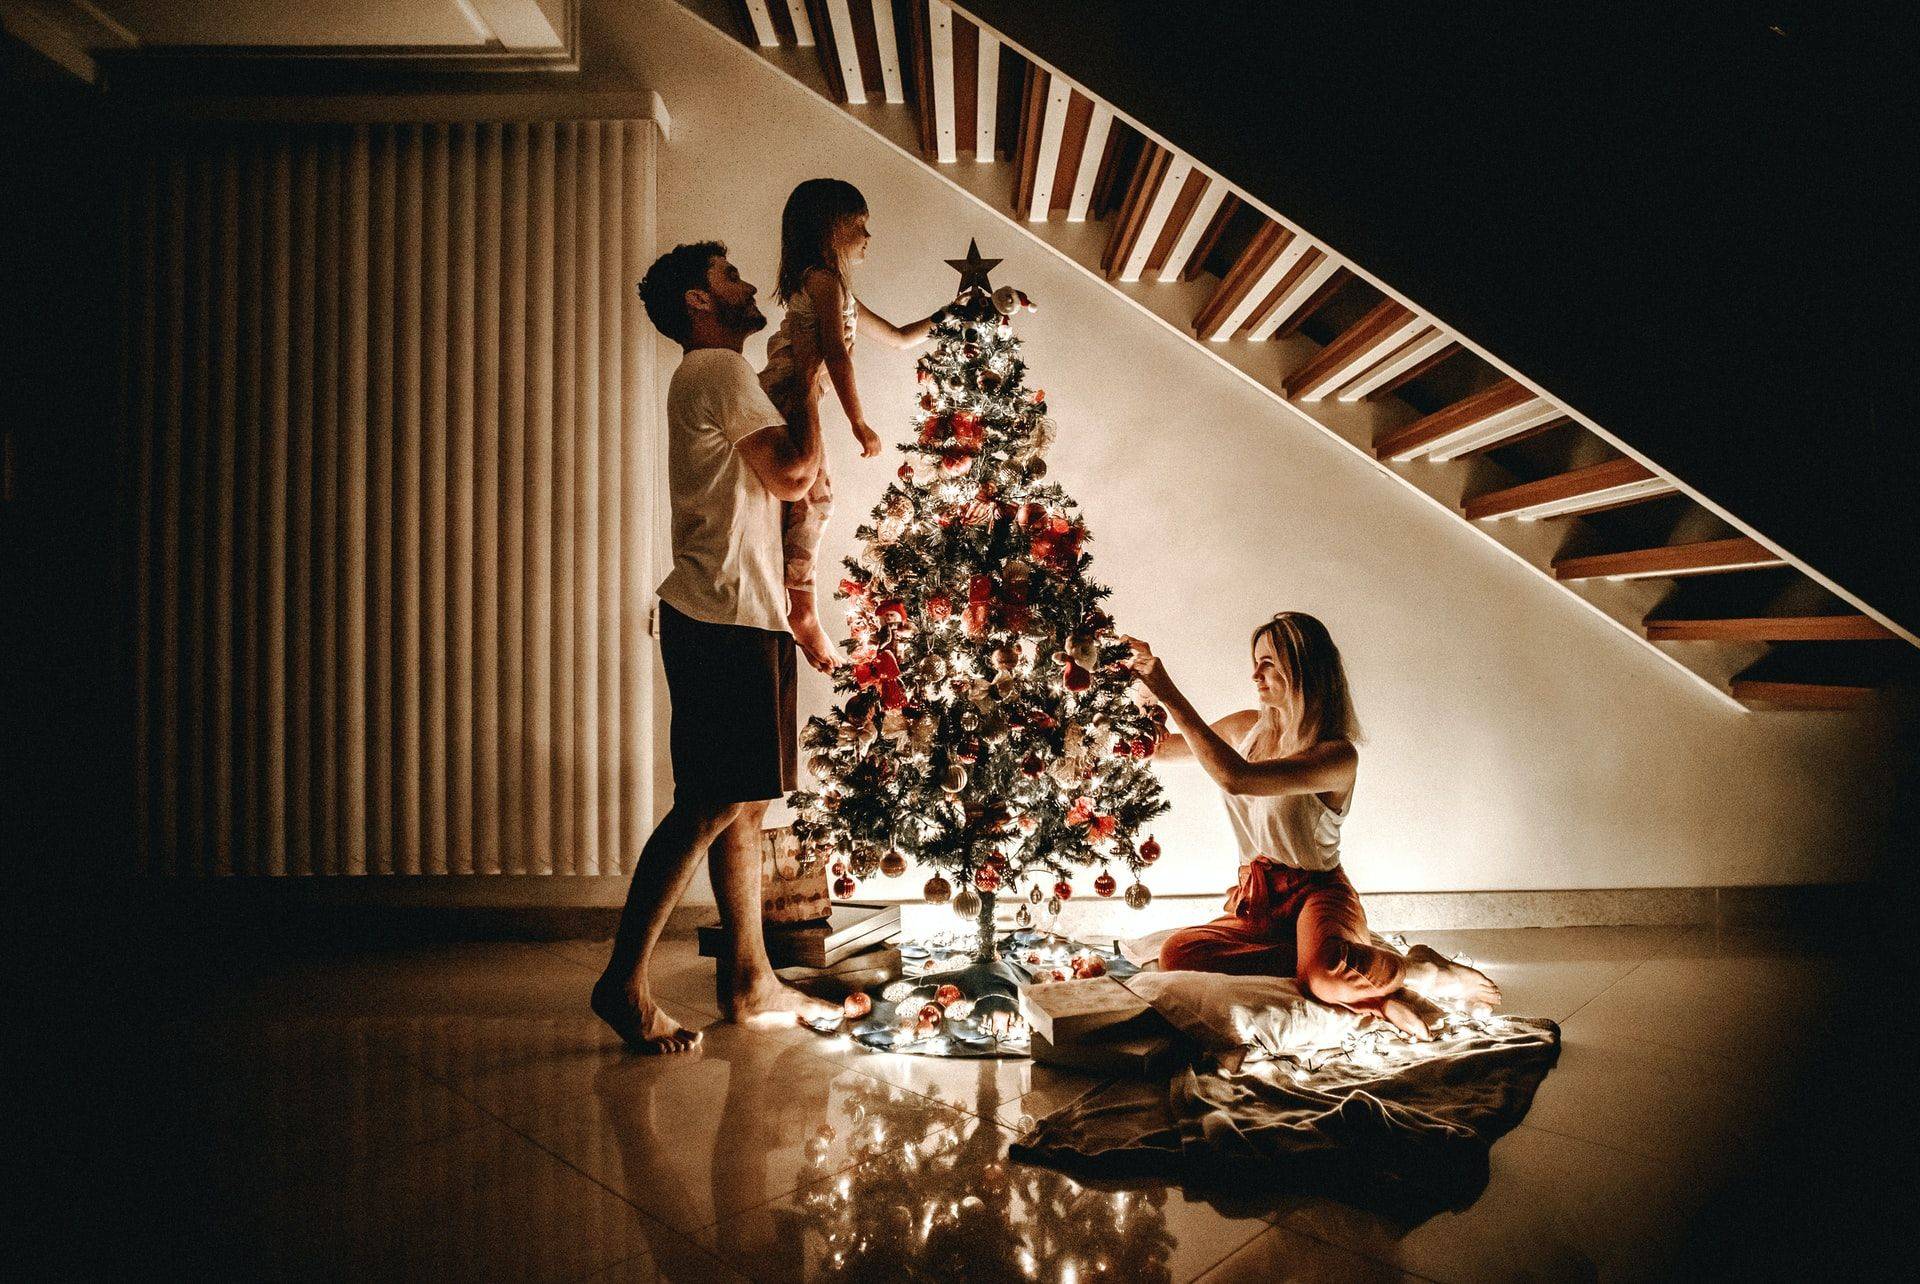 How to spend a meaningful Christmas as an expat